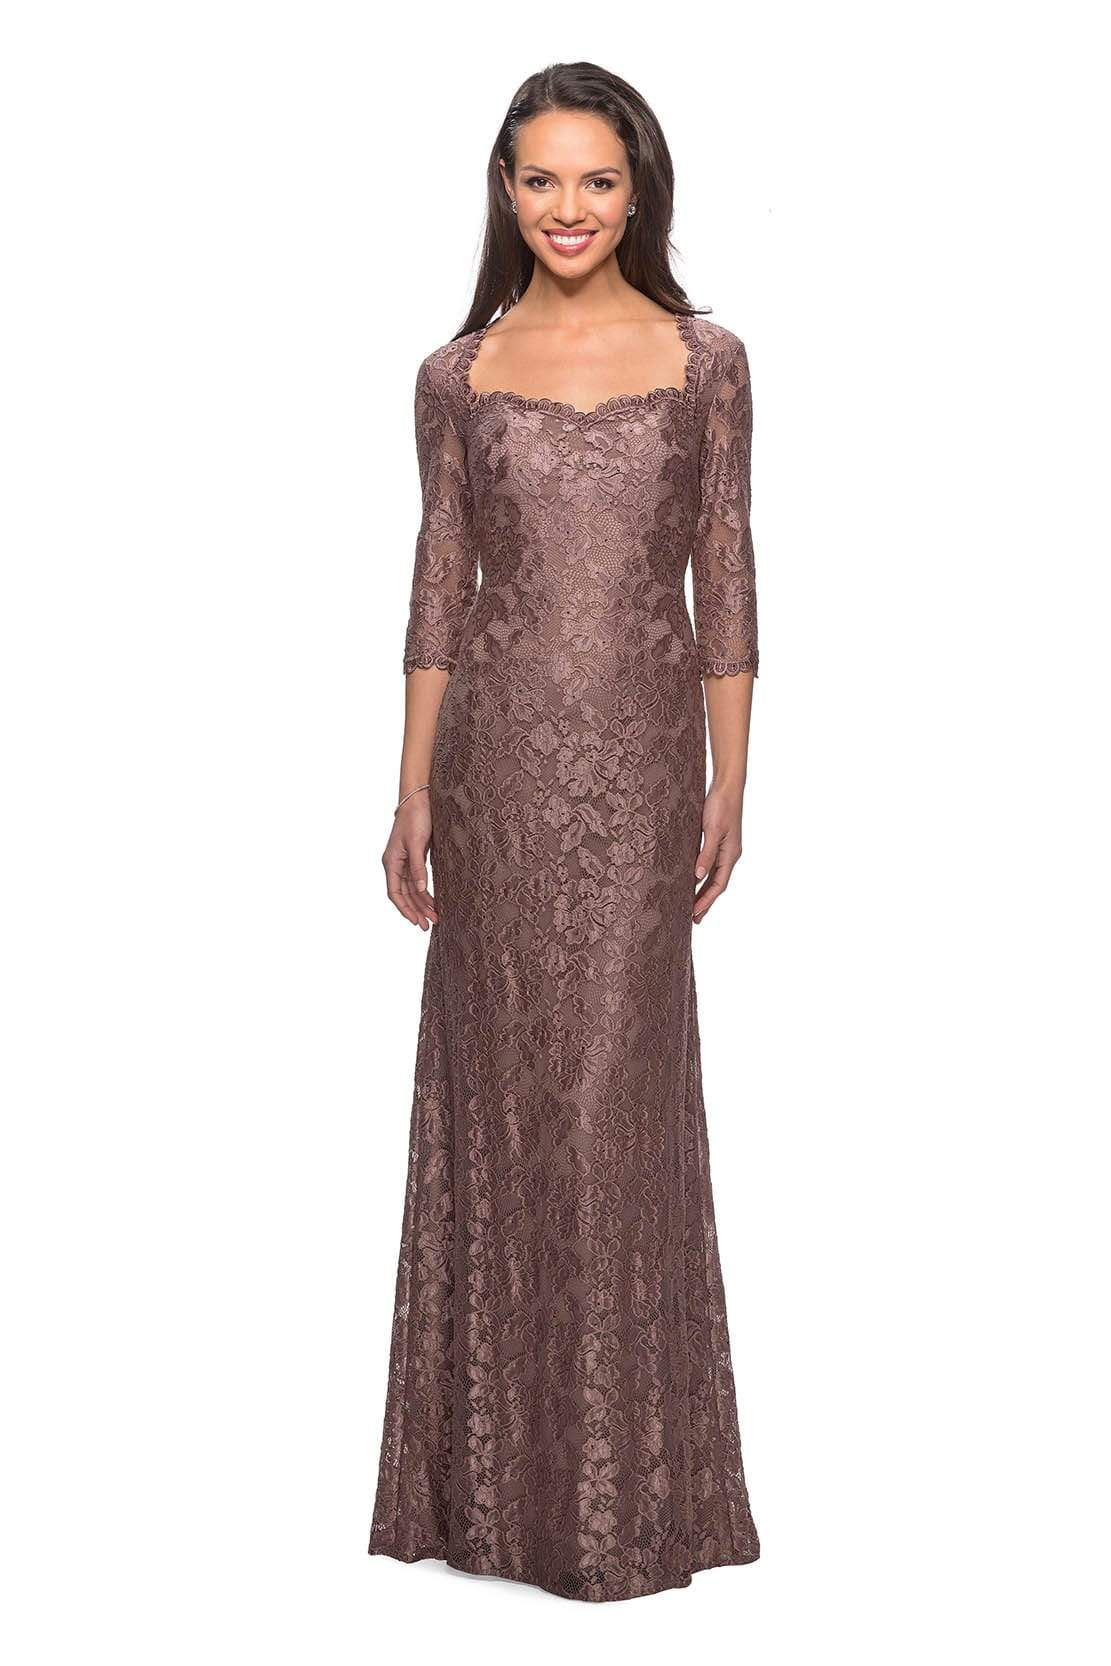 La Femme - 26427 Floral Lace Sheer Quarter Sleeve Sheath Gown Mother of the Bride Dresses 4 / Cocoa